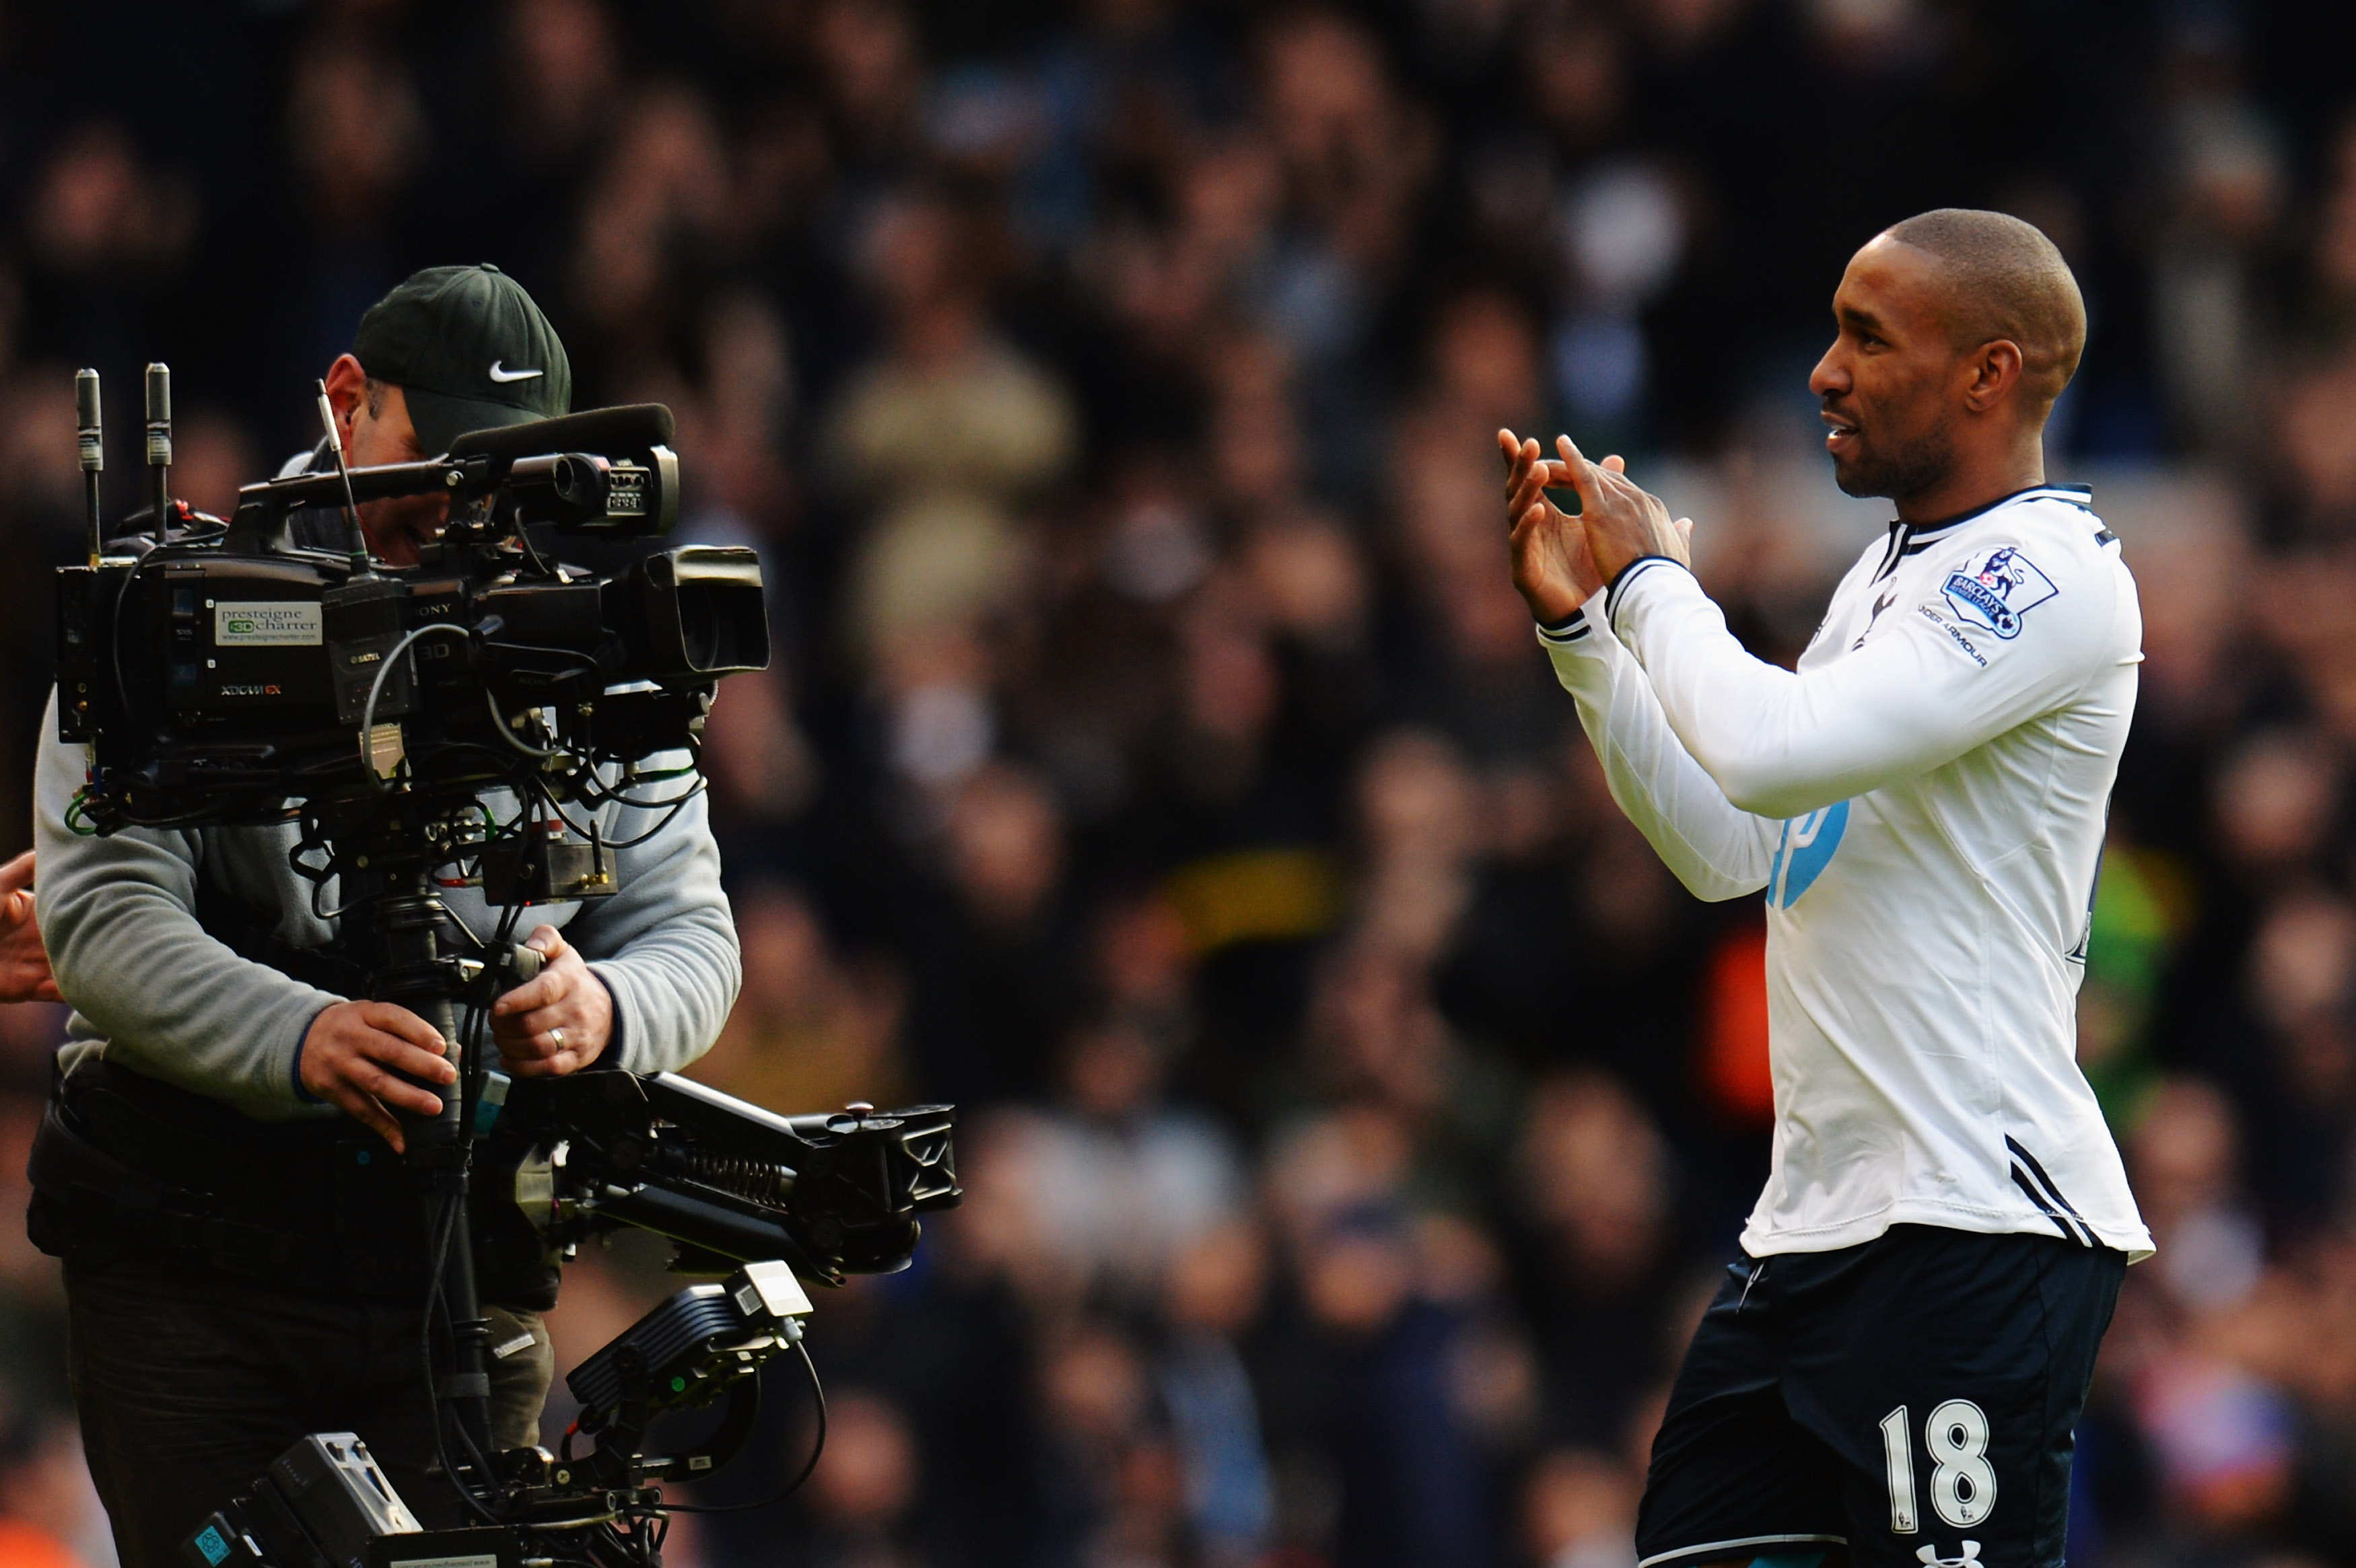 Jermain Defoe applauds the Tottenham fans at the end of his final home game for the club at White Hart Lane, against Everton in 2014.